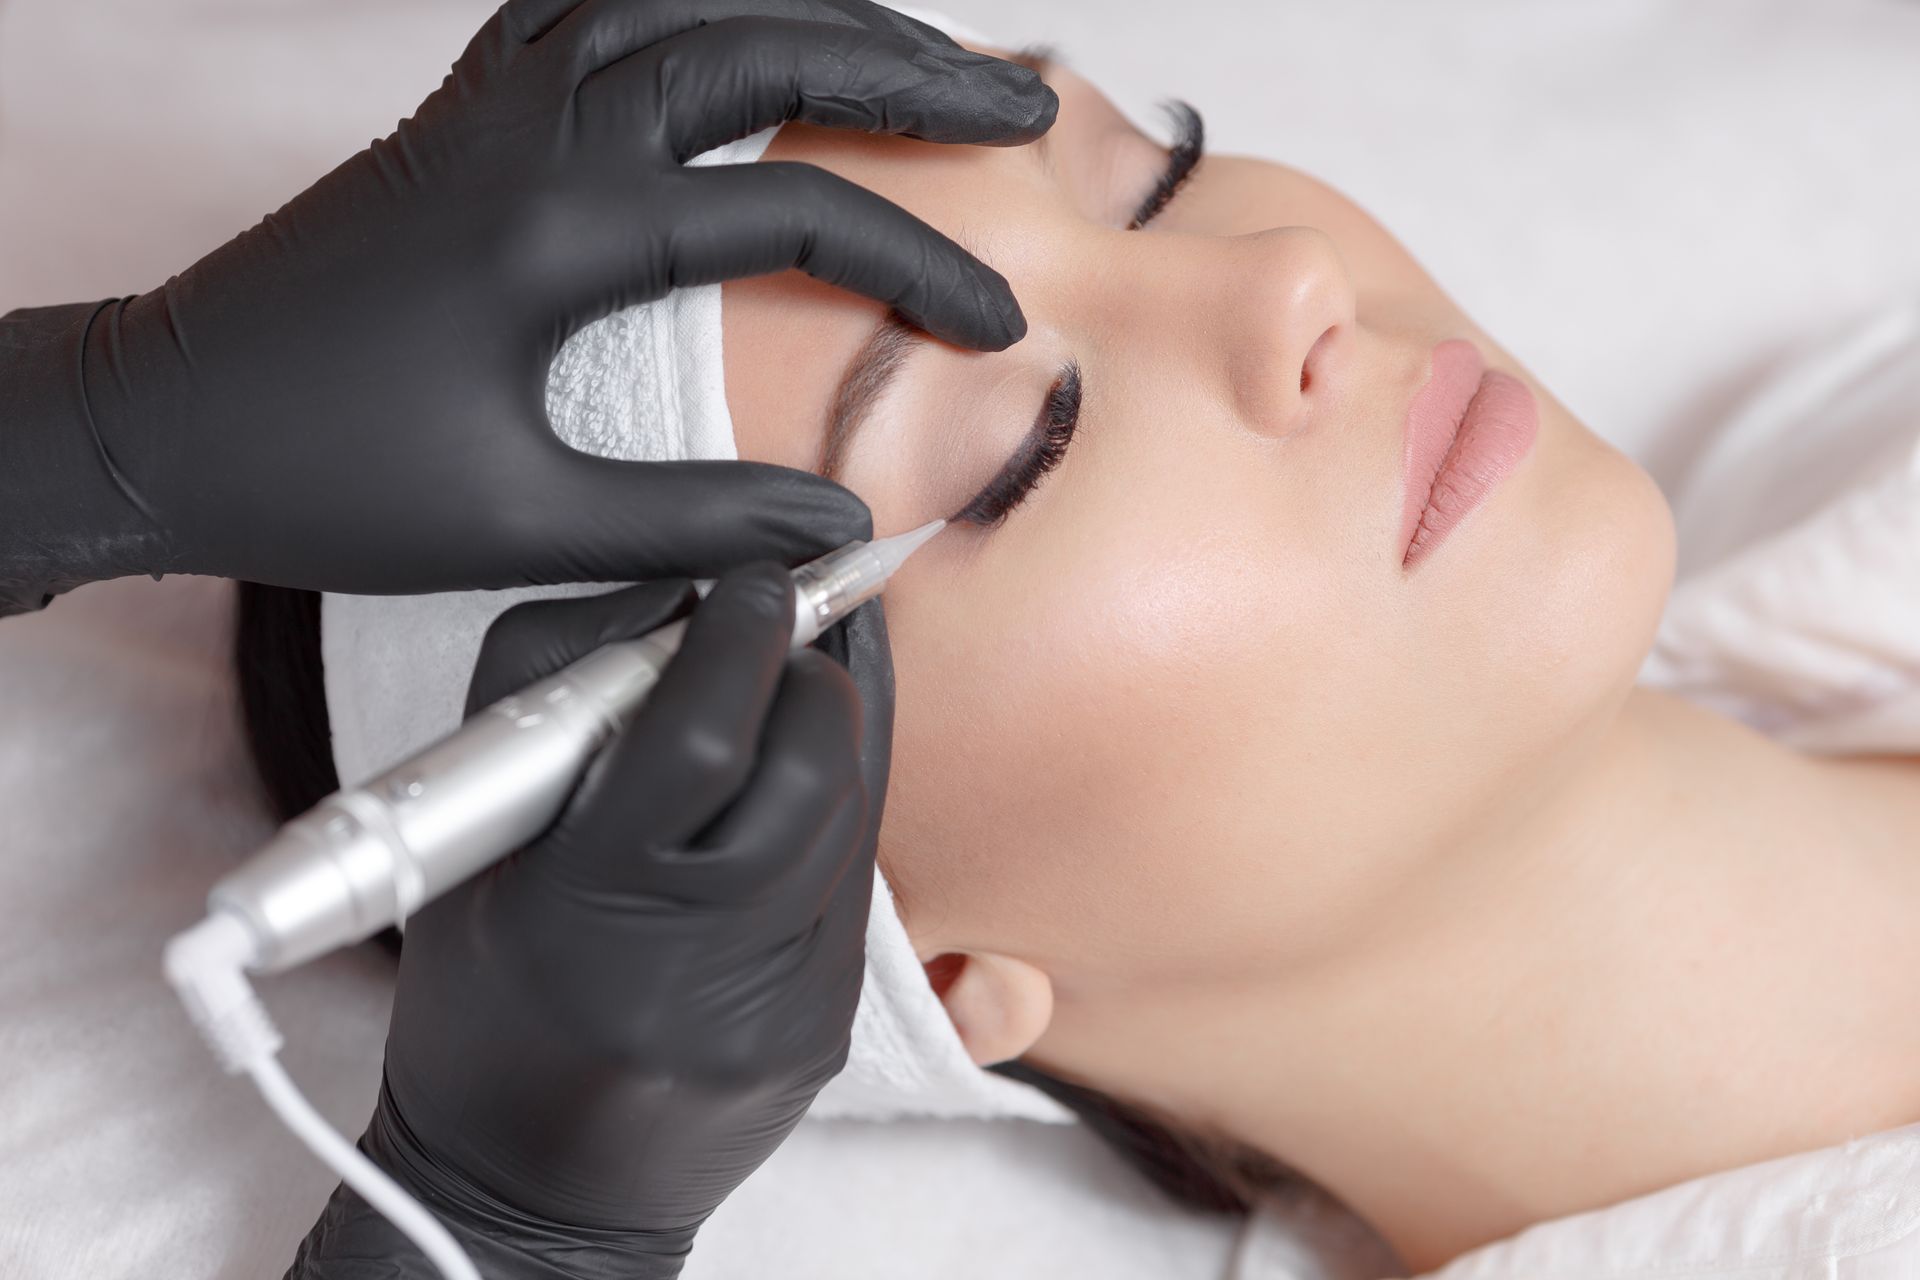 A woman is getting a permanent makeup treatment on her eyebrows.